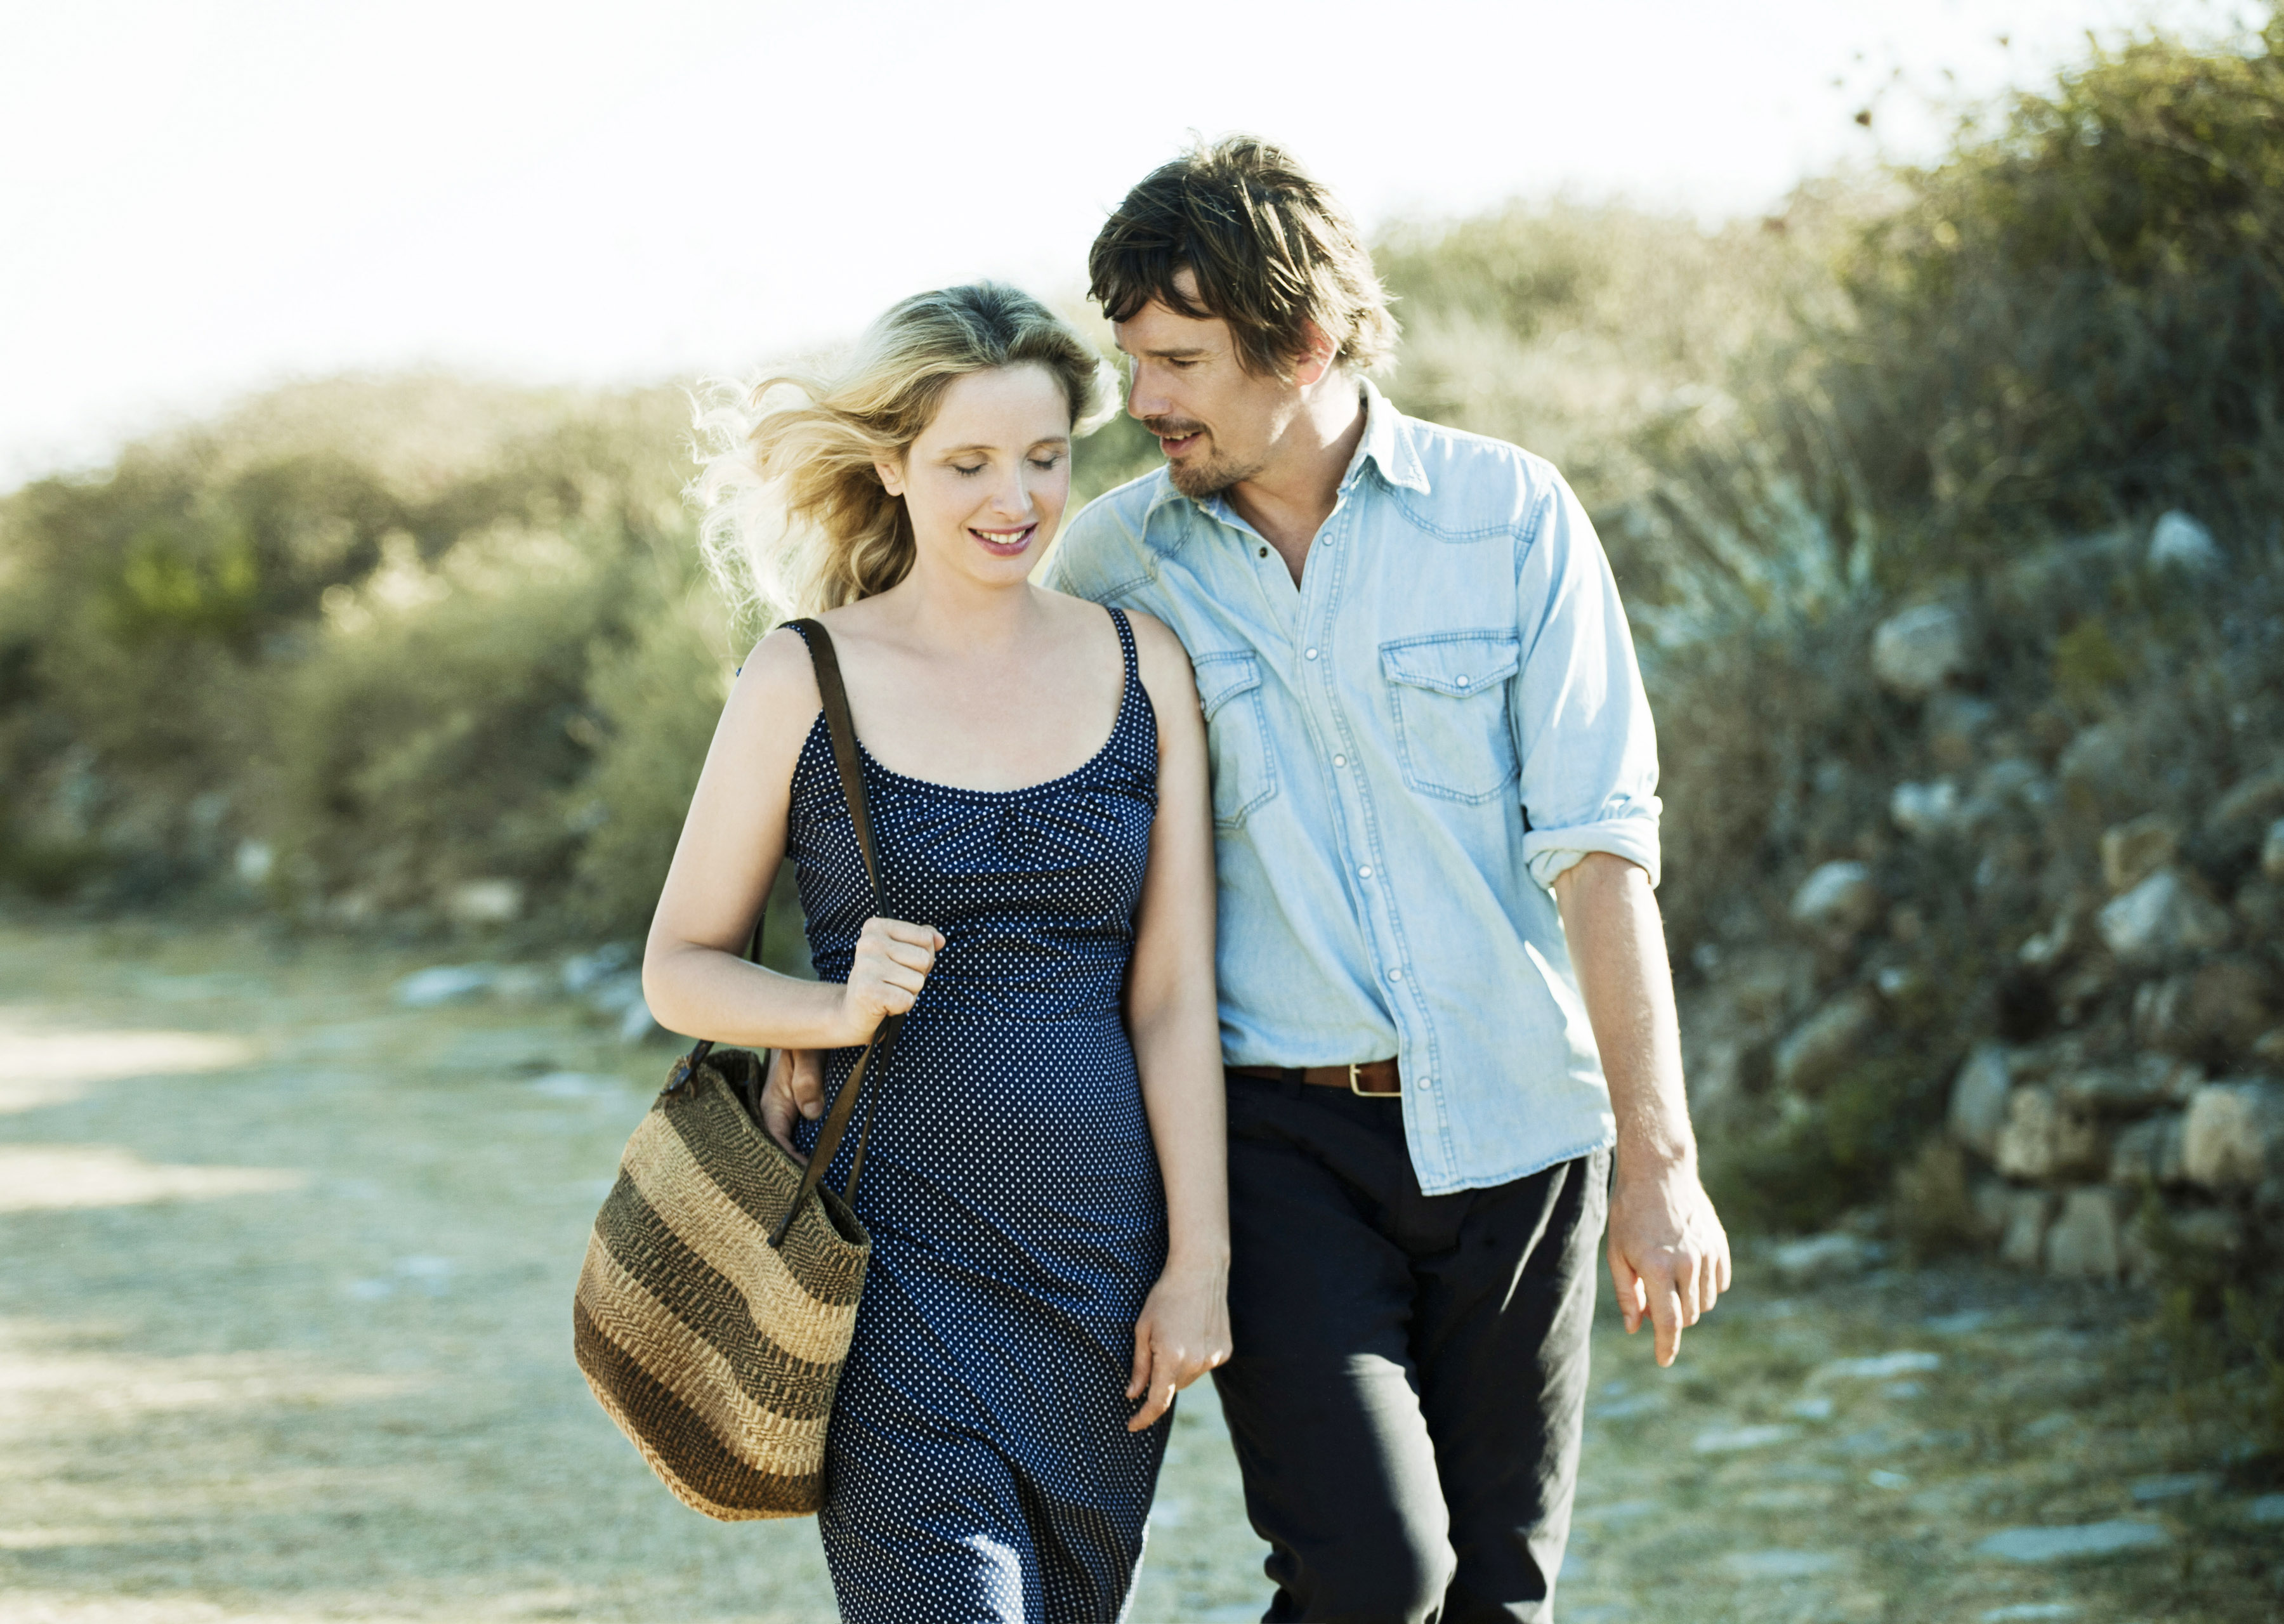 Julie Delpy and Ethan Hawke in Before Midnight. (Sony Pictures/Everett Collection)